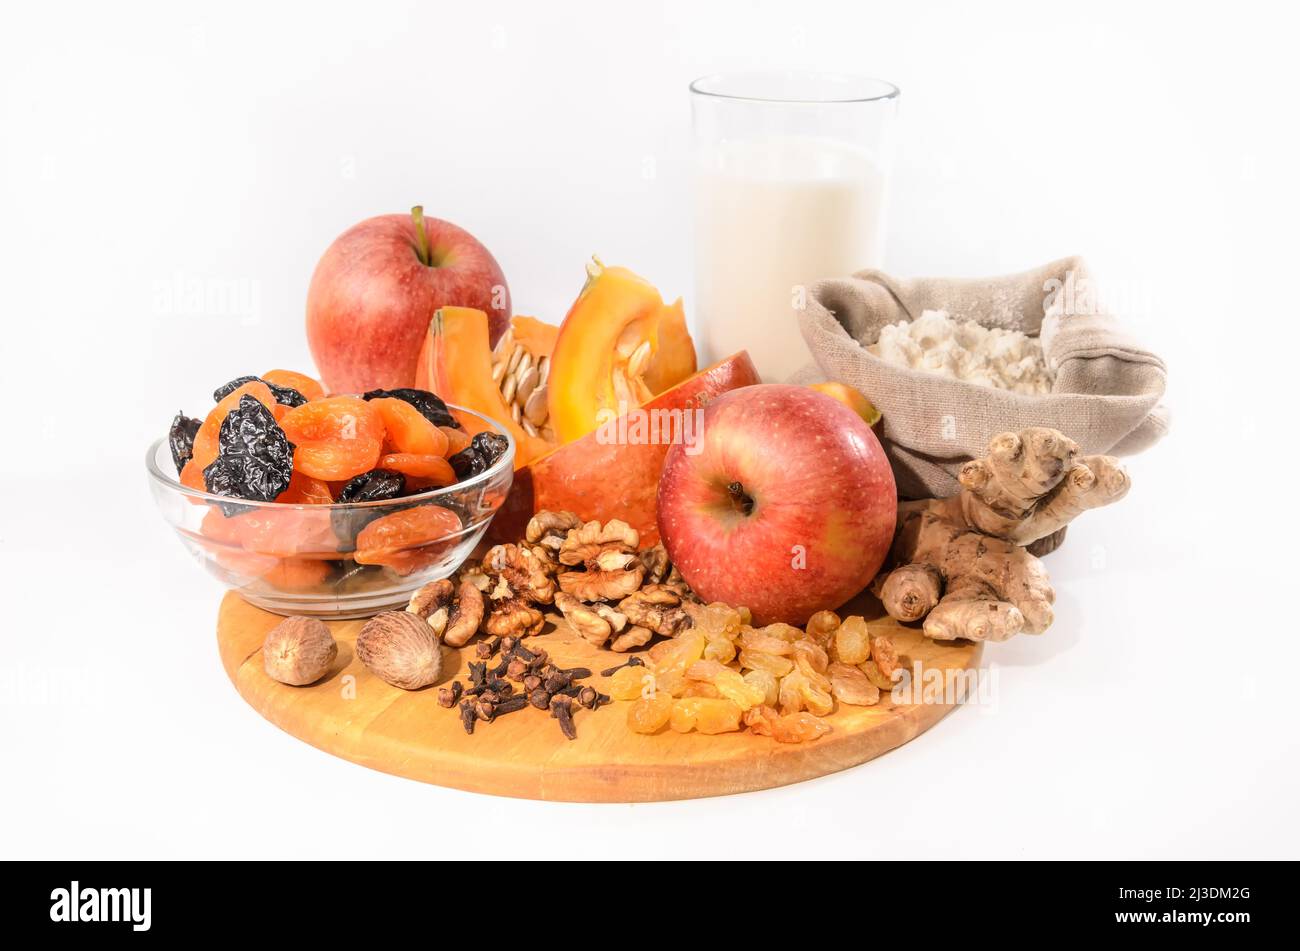 pumpkin and ingredients for pumpkin casserole with nuts and dried fruits on a light background Stock Photo